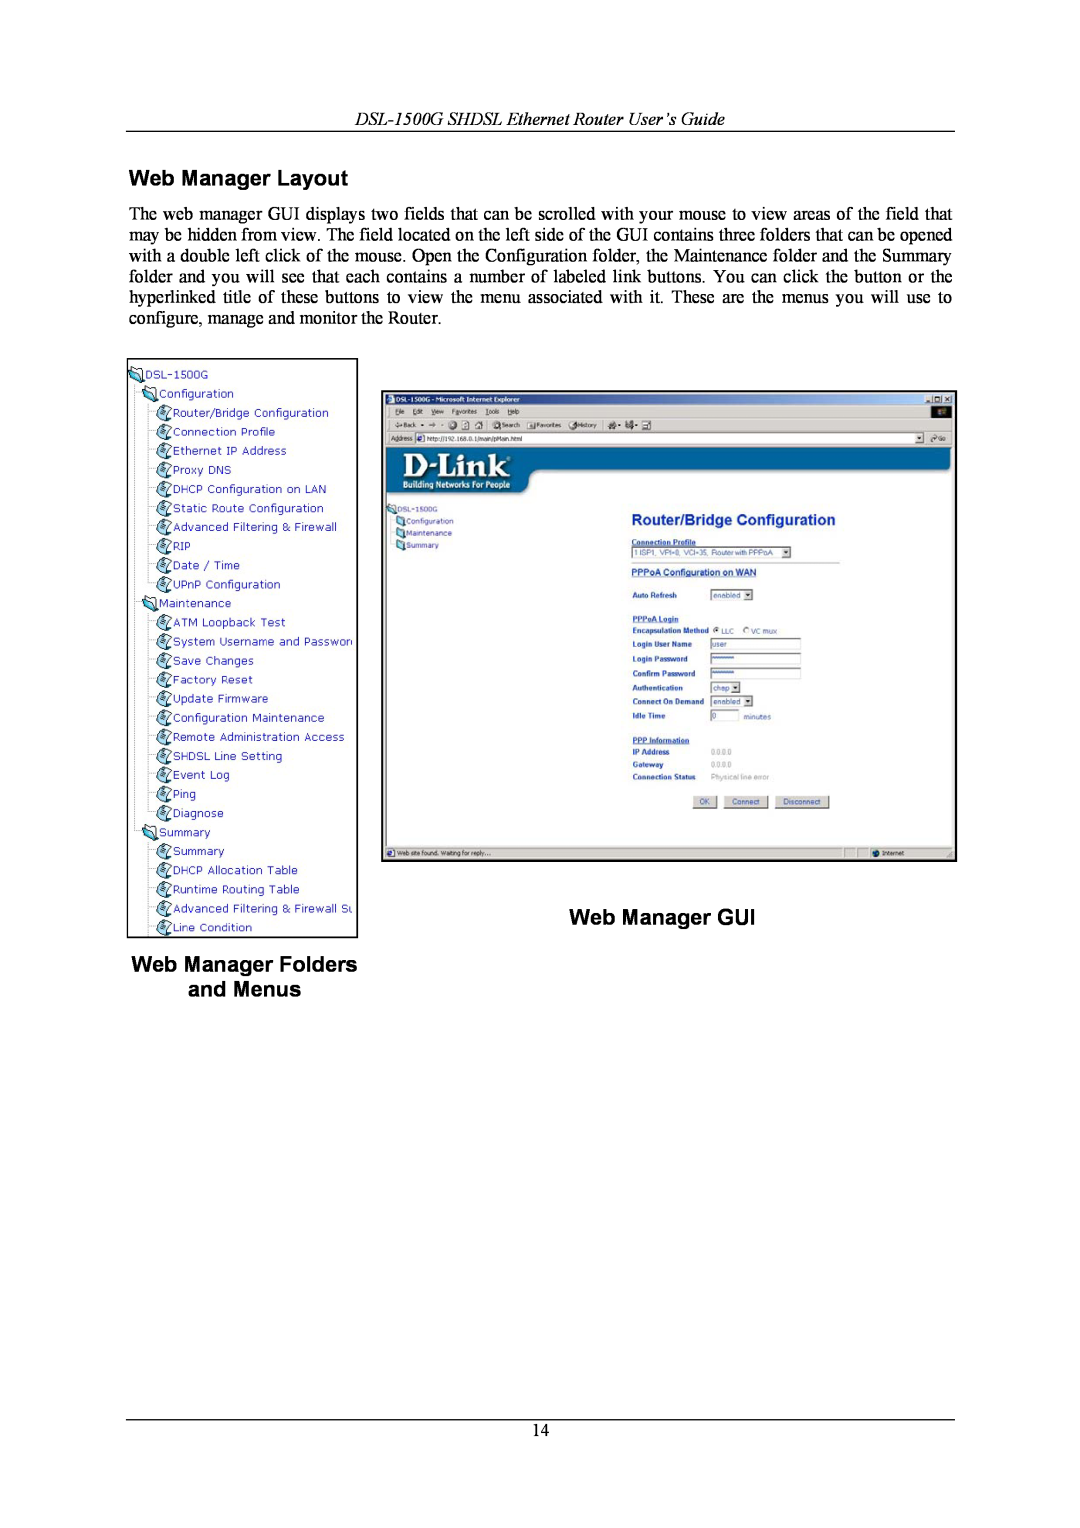 D-Link DSL-1500G manual Web Manager Layout, Web Manager GUI Web Manager Folders and Menus 